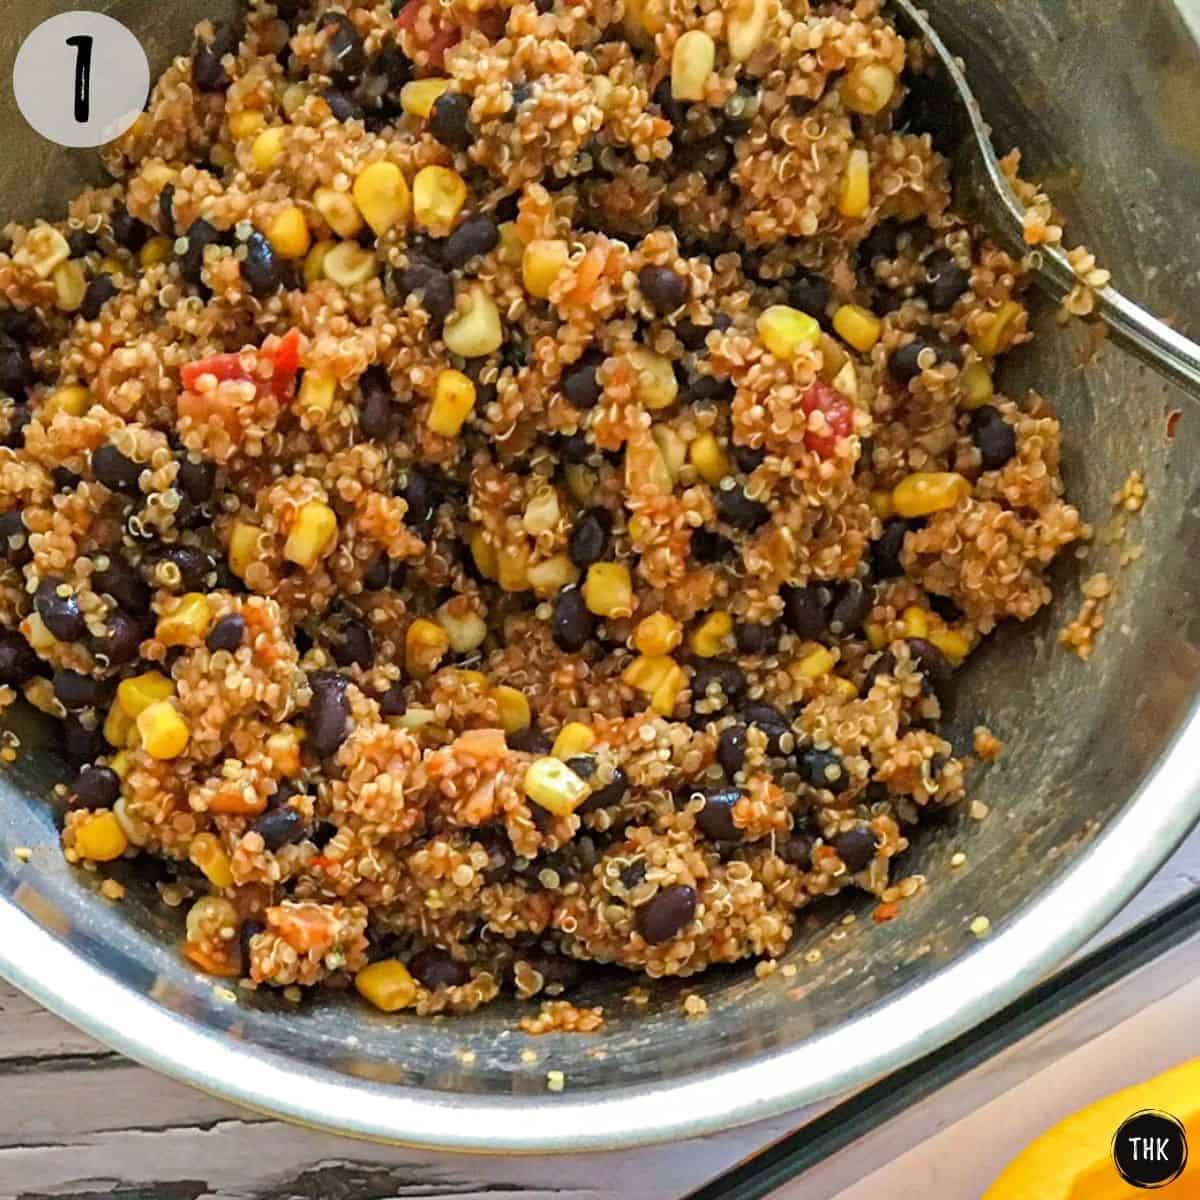 Large mixing bowl filled with cooked quinoa, black beans, corn, salsa and seasoning.